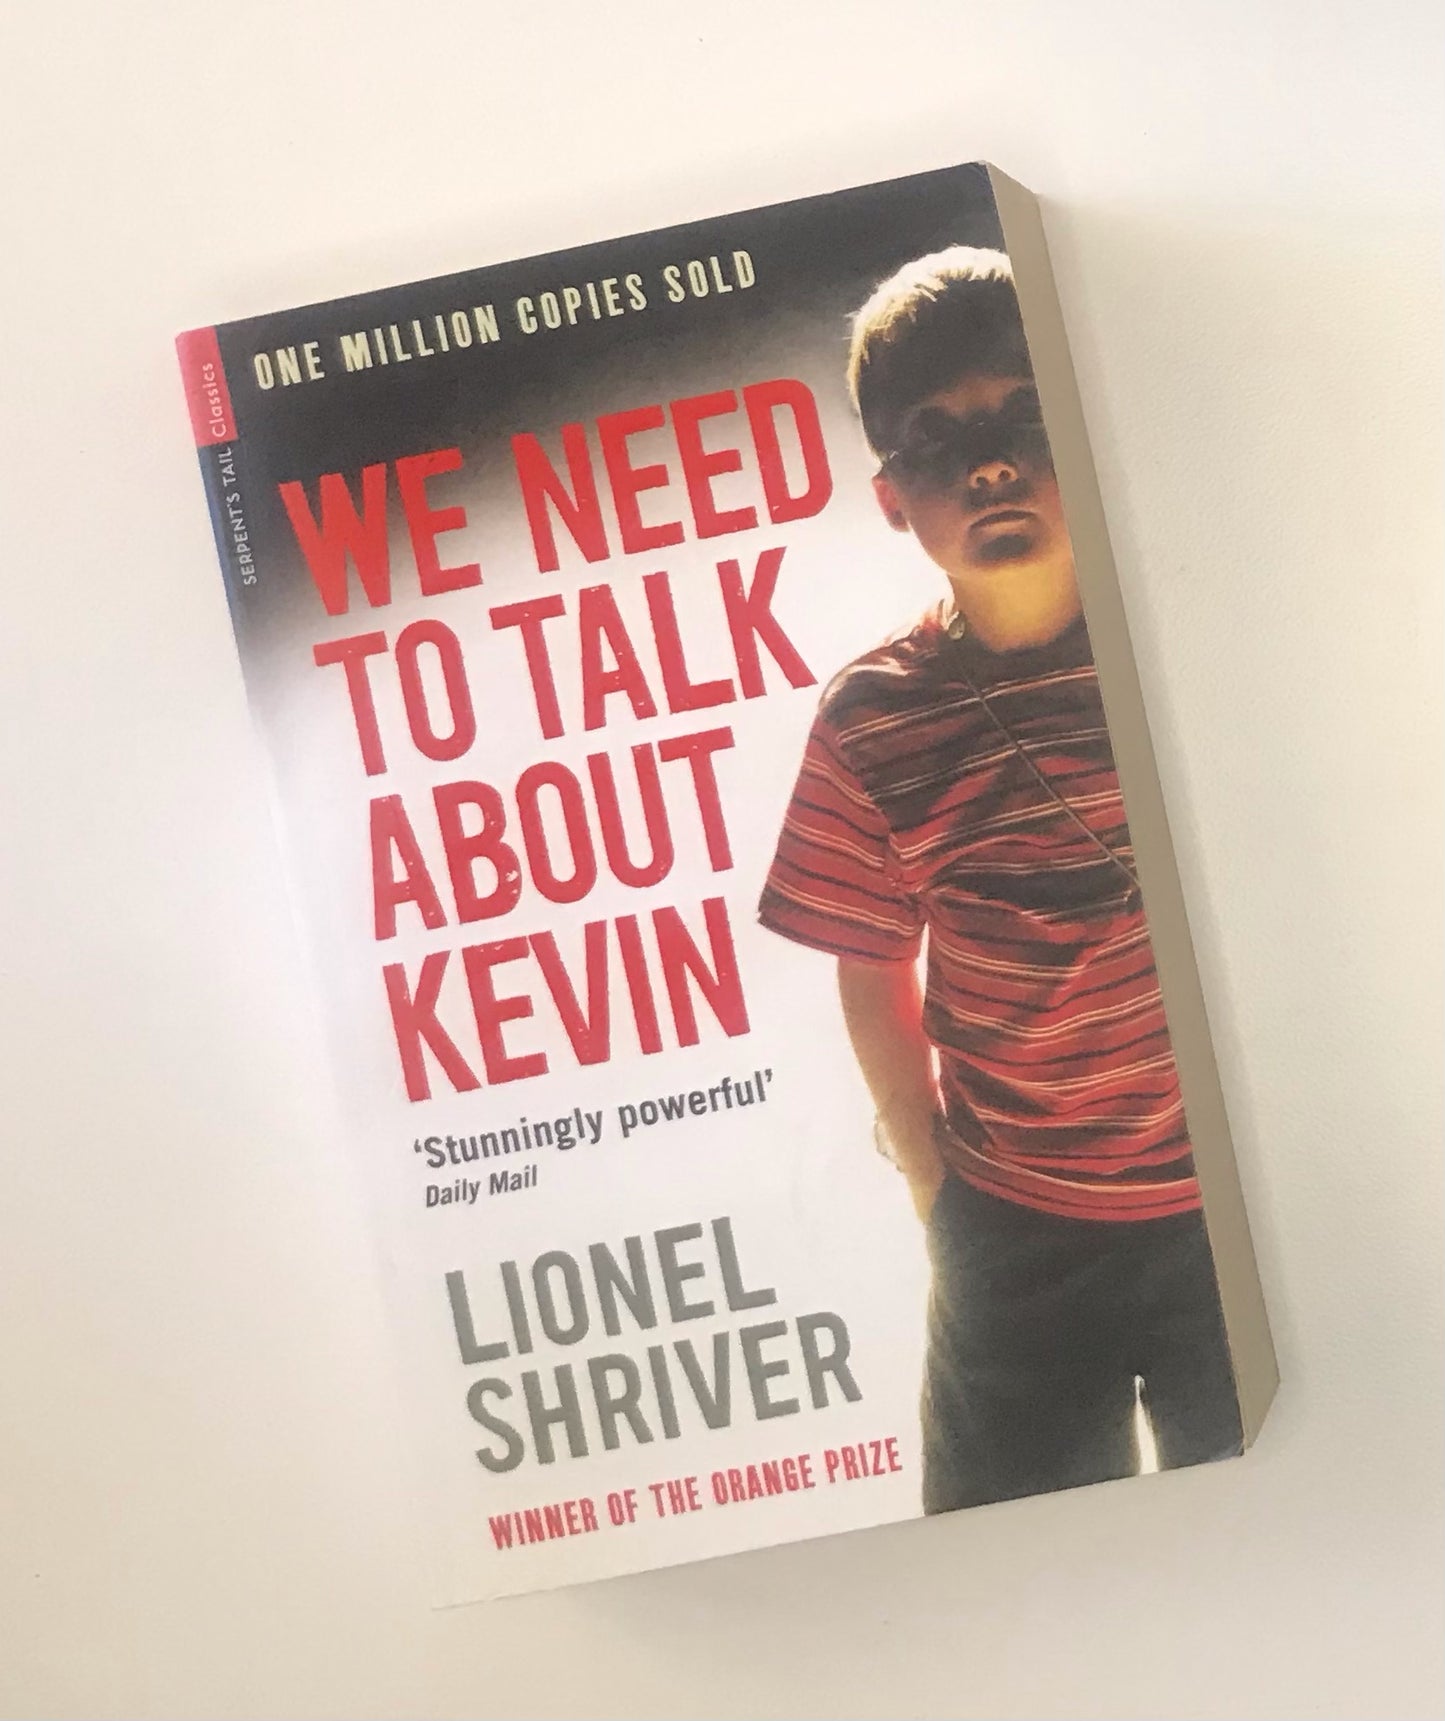 We need to talk about Kevin - Lionel Shriver